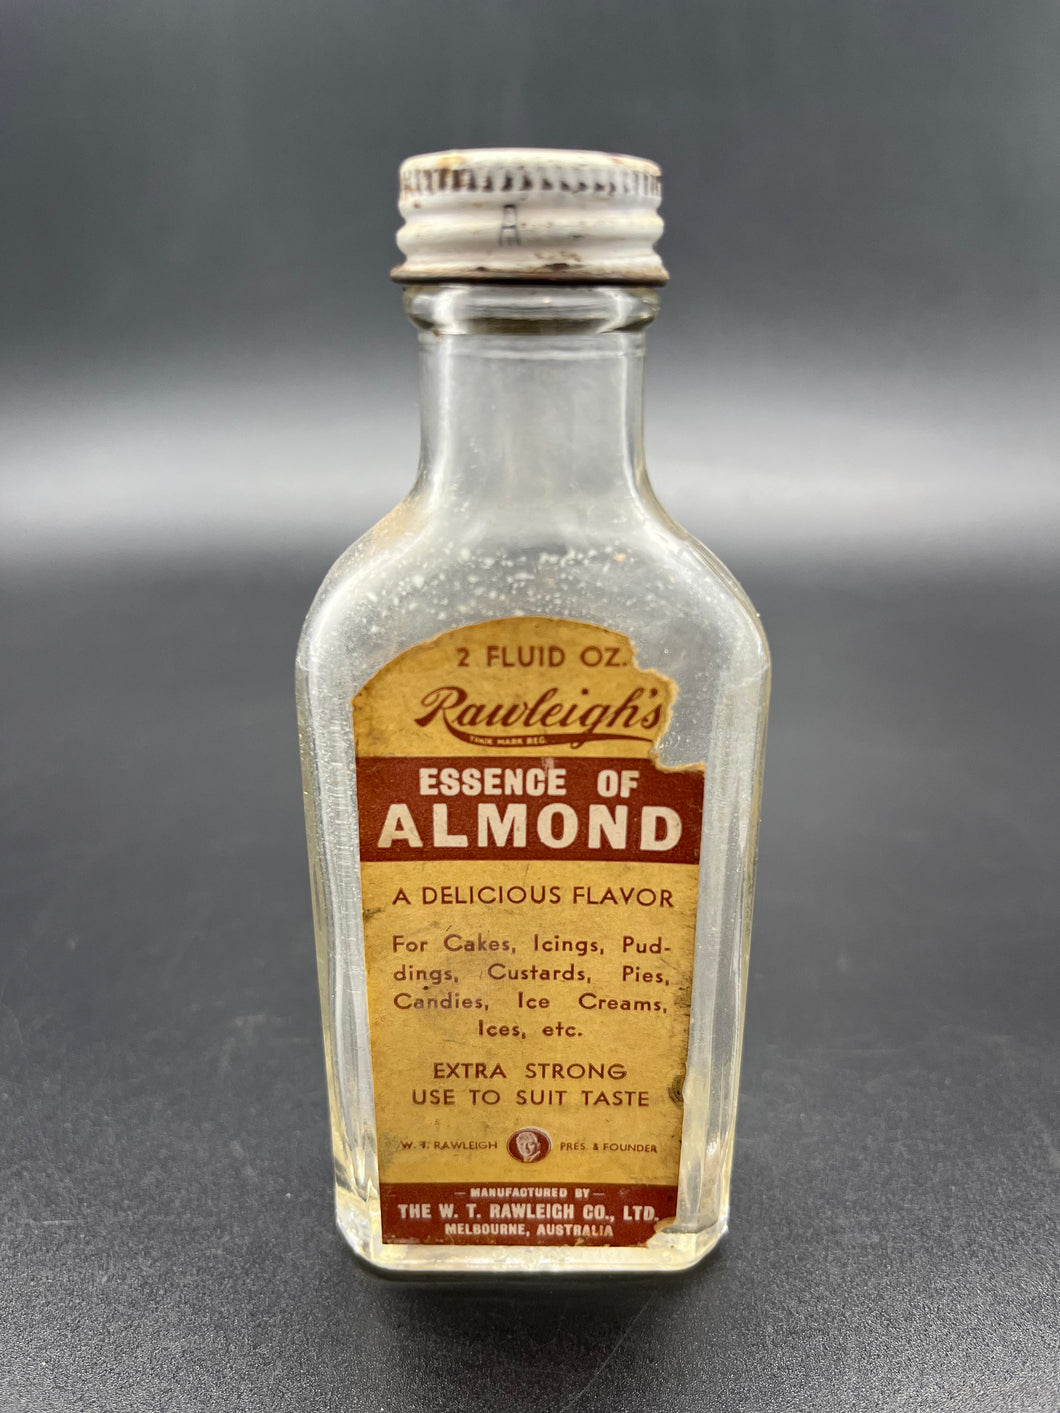 Vintage Rawleigh's Essence of Almond Bottle with Paper Label